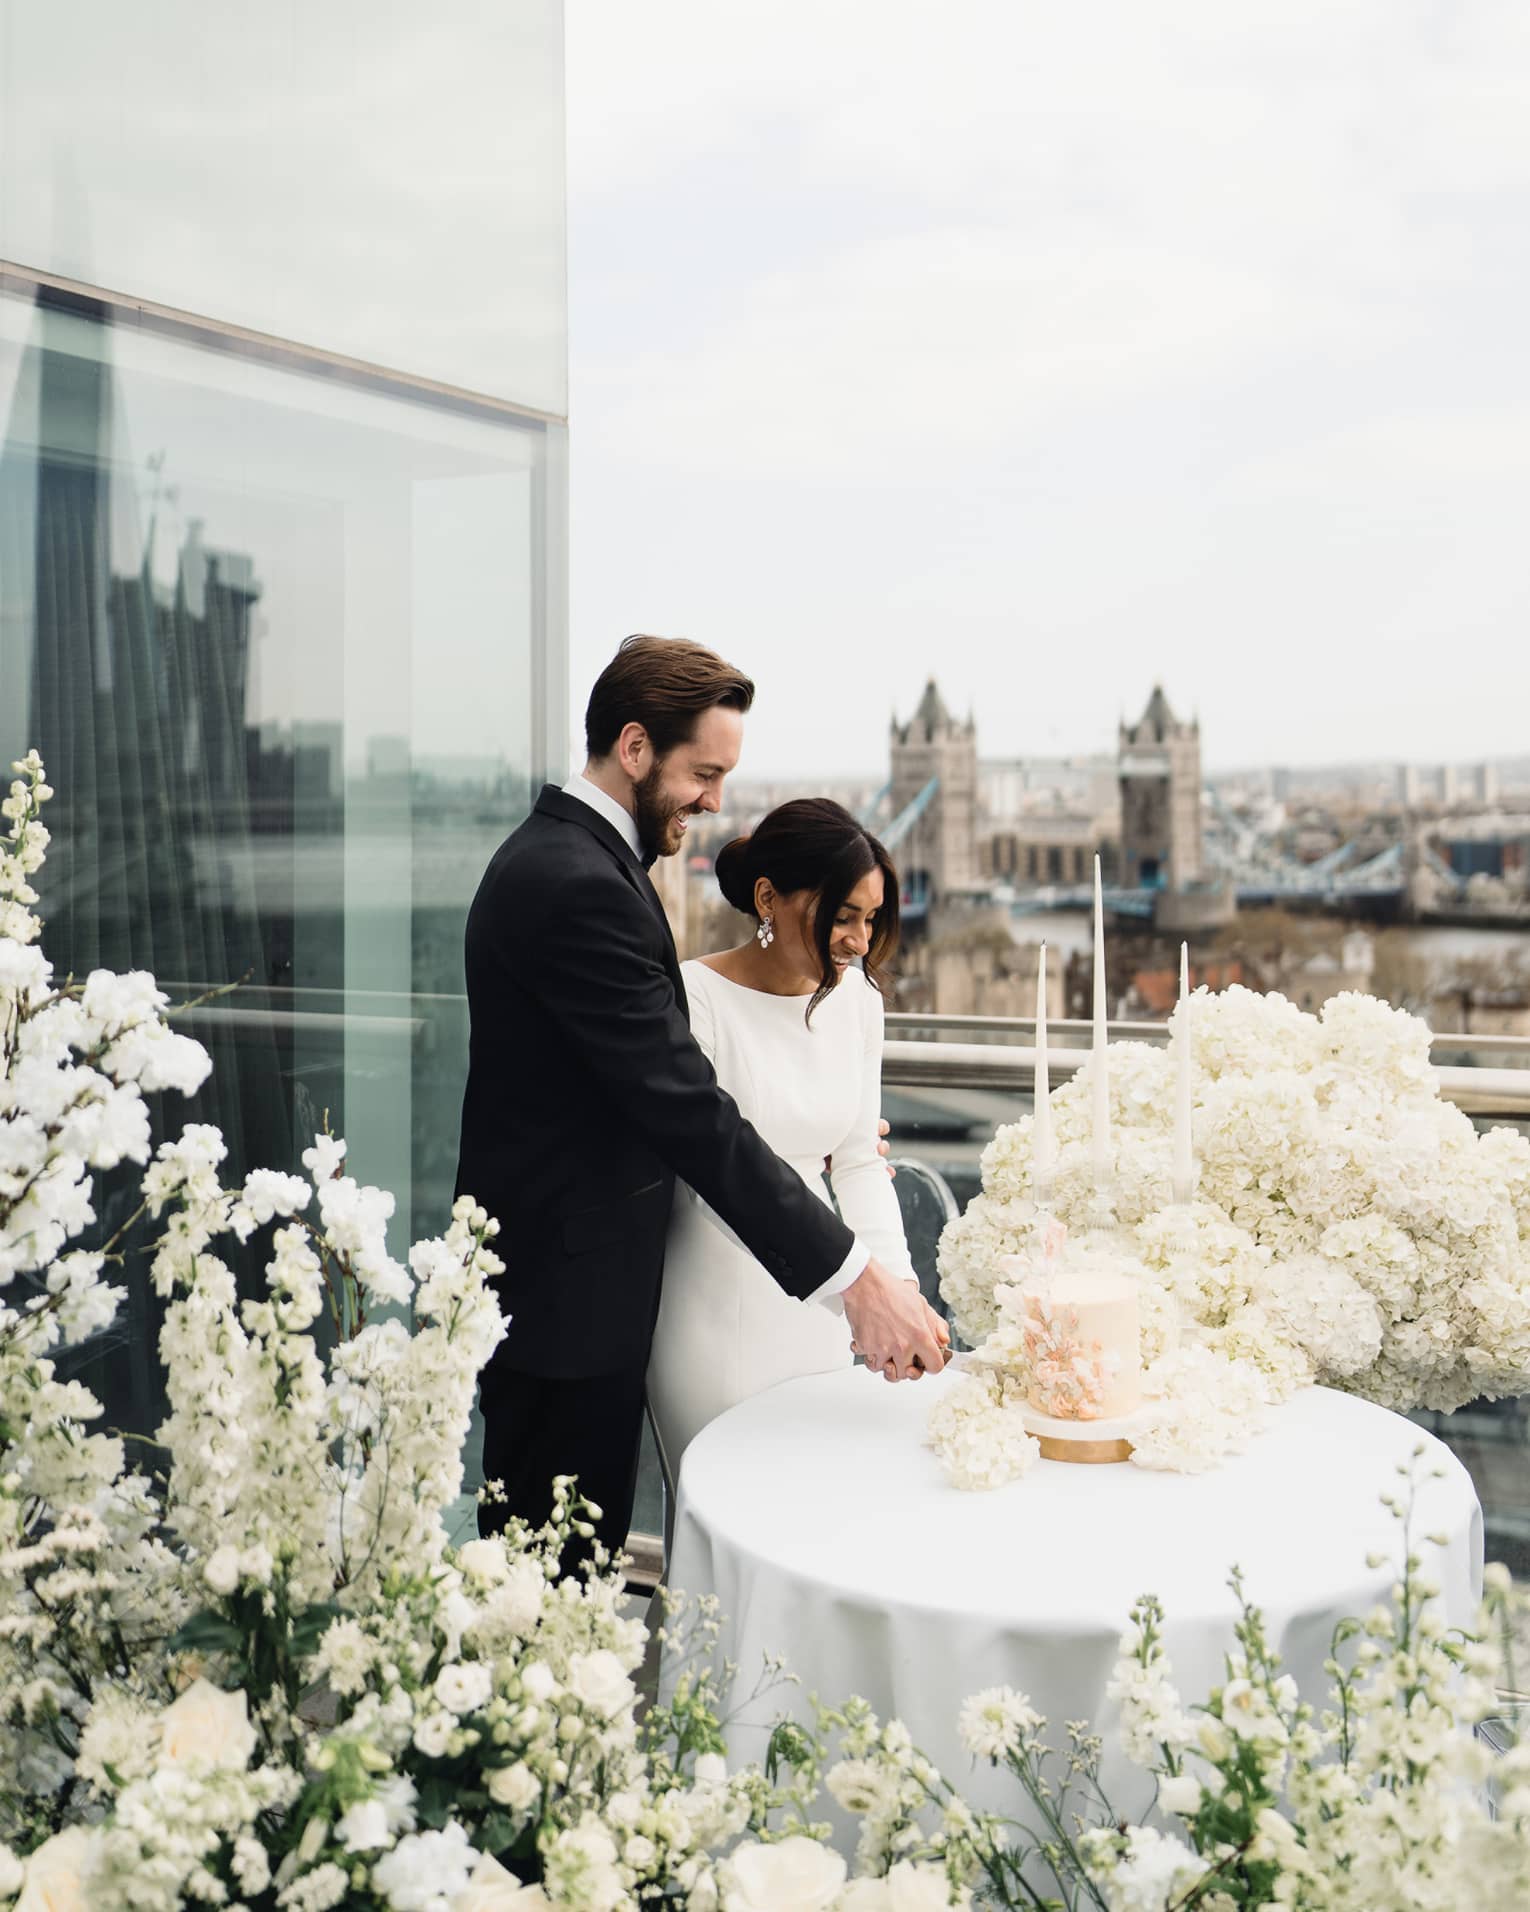 Groom and bride cutting the cake together on a terrace with Tower Bridge in backdrop